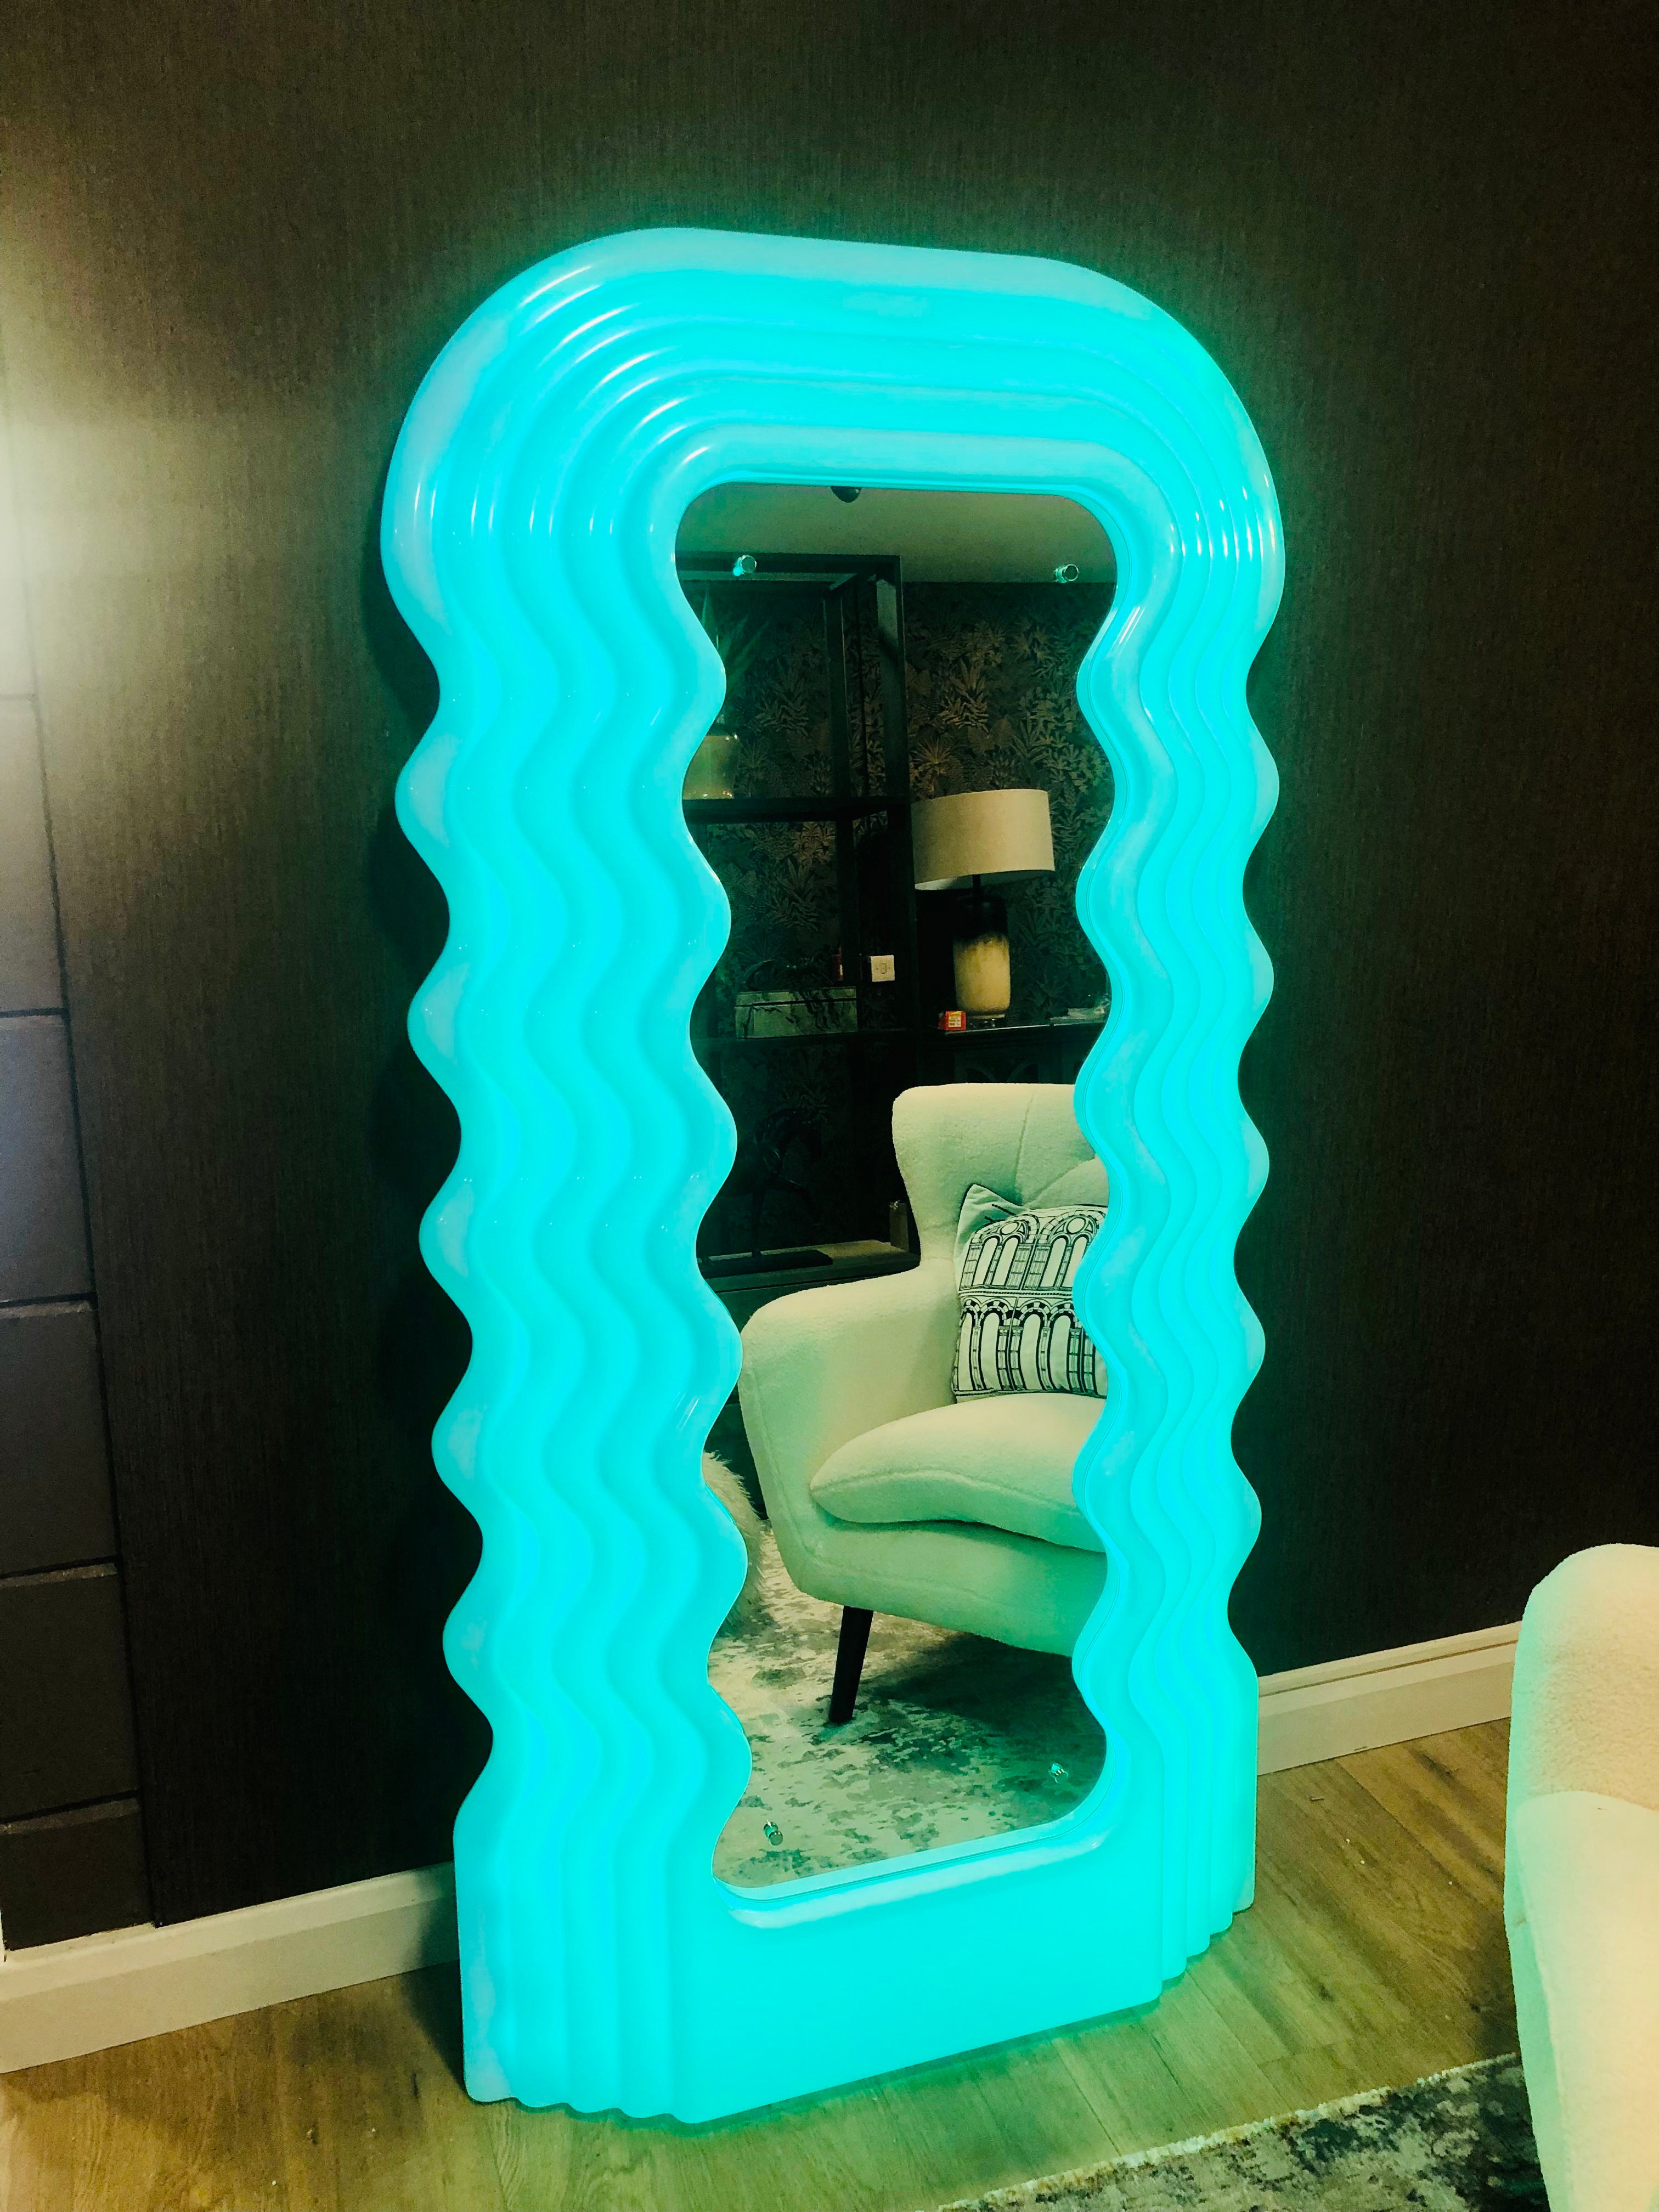 Colour Changing Ultra Wave Mirror - 7 Different Colour Options